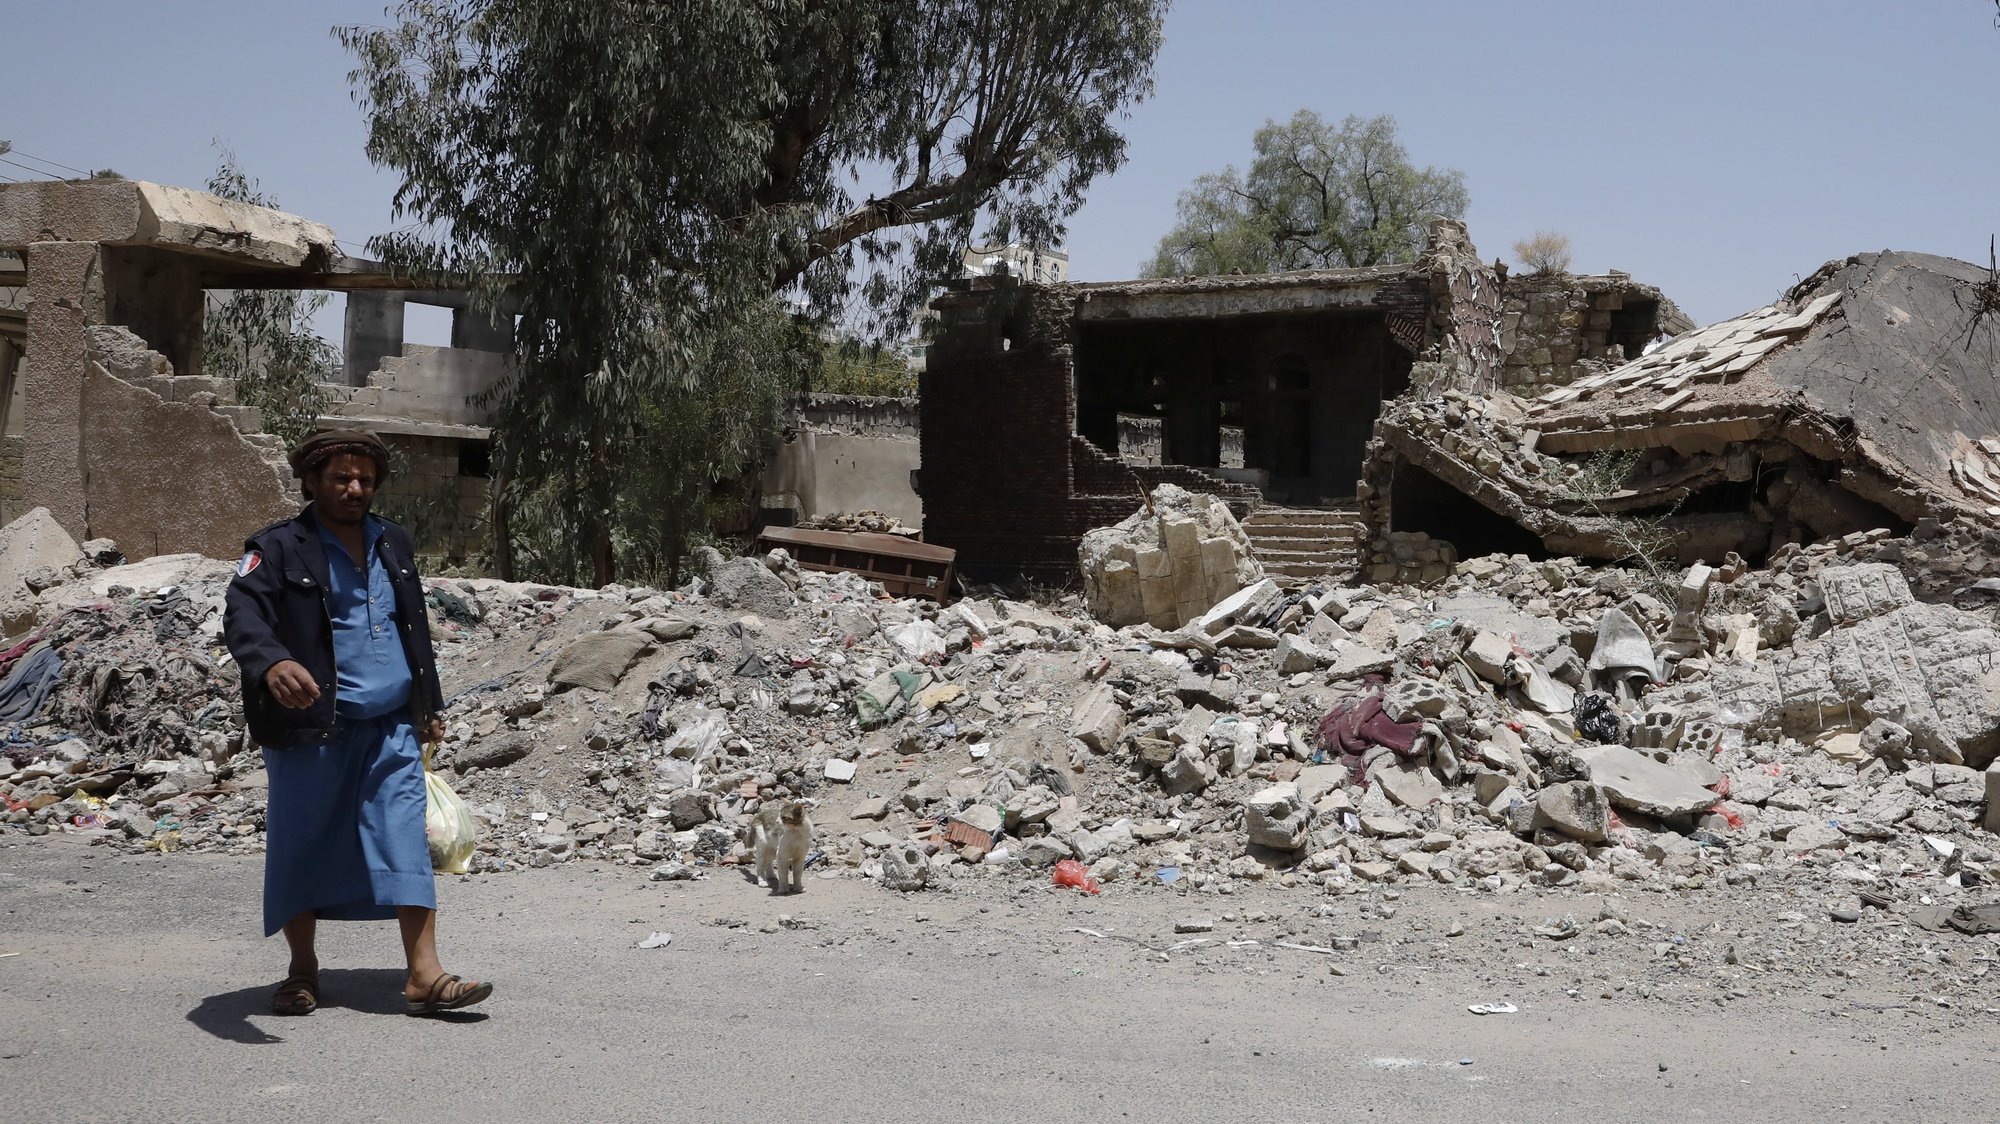 epa09860535 A Yemeni walks past a destroyed building targeted by previous Saudi-led airstrikes at a neighborhood in Sana&#039;a, Yemen, 30 March 2022. Intra-Yemeni consultations on the country’s devastating war started in Saudi Arabia amid the Houthis&#039; boycott, a few hours after the Saudi-led military coalition began a unilateral ceasefire in Yemen for the Muslim holy month of Ramadan. The consultations aim at discussing a peaceful settlement of the prolonged war in the Arab country. The Houthis have declined to attend the Saudi-hosted peace consultations being held from 30 March until 07 April 2022, claiming that Saudi Arabia is not a neutral country as it has been leading a military coalition fighting them since March 2015 for restoring the internationally-recognised Yemeni government.  EPA/YAHYA ARHAB